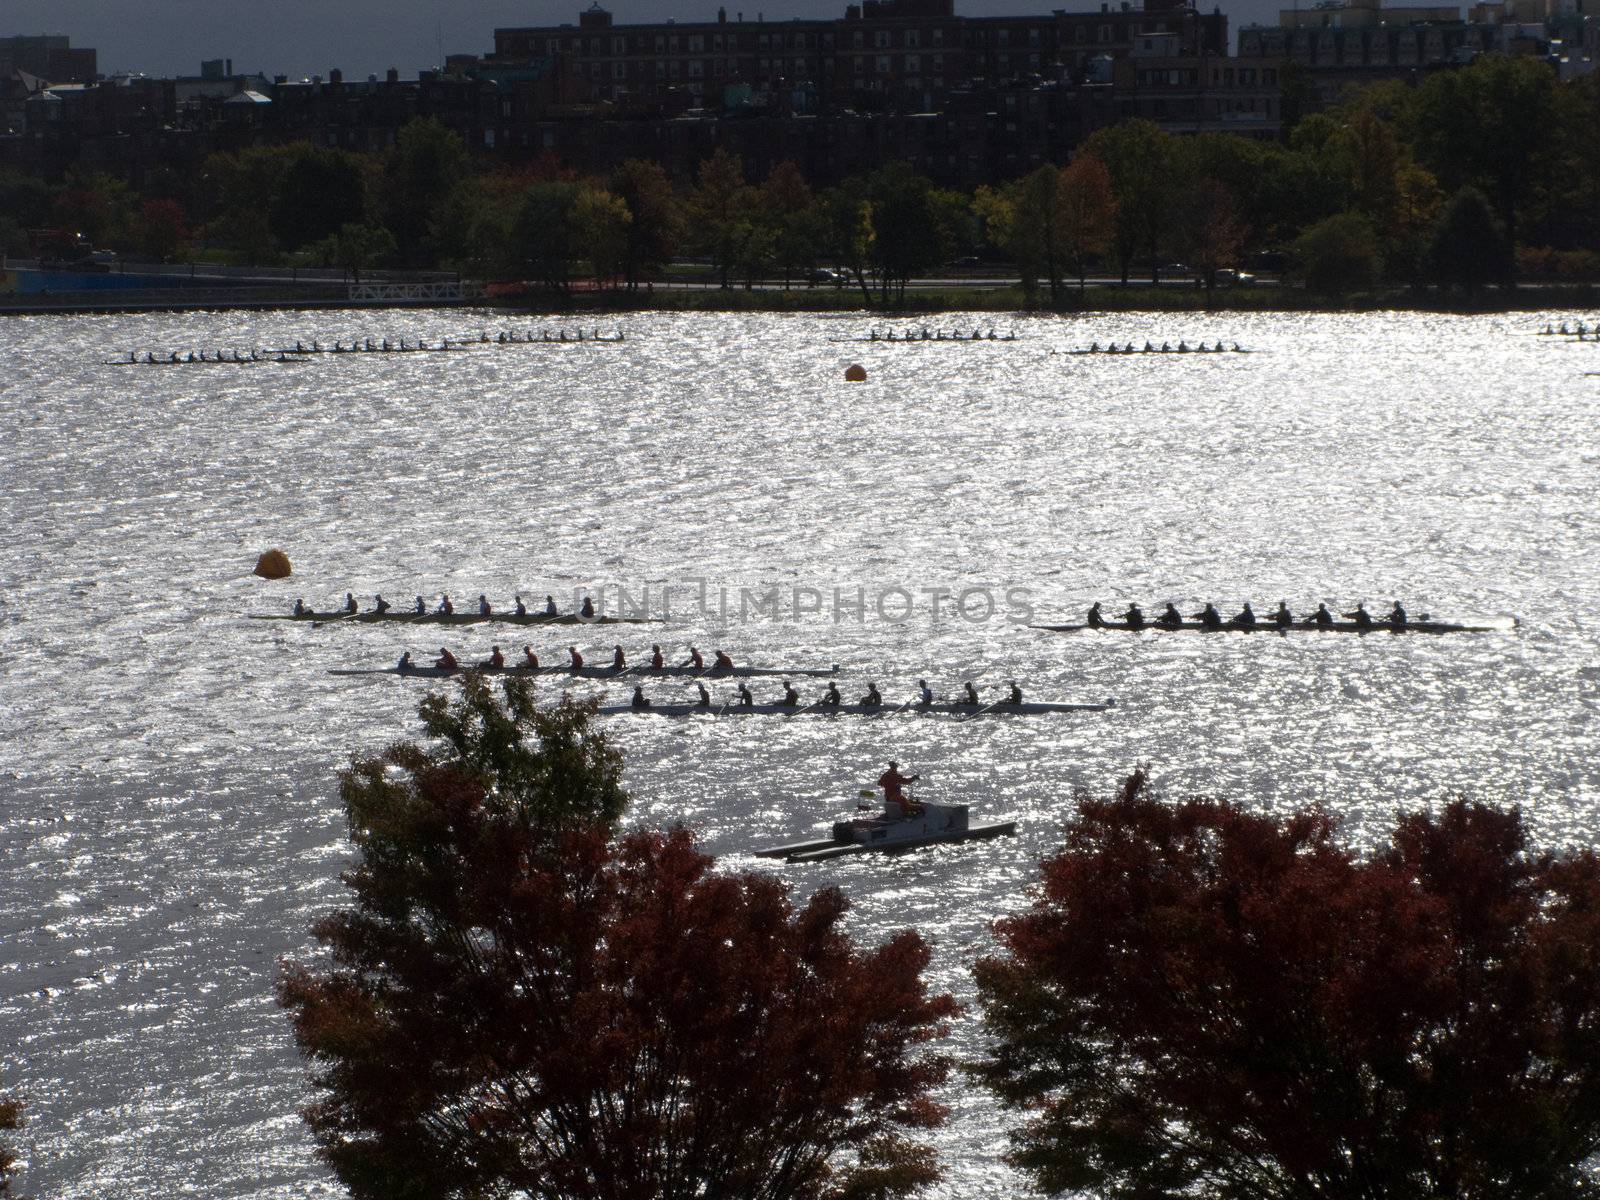 Rowers during the Head of the Charles Regatta